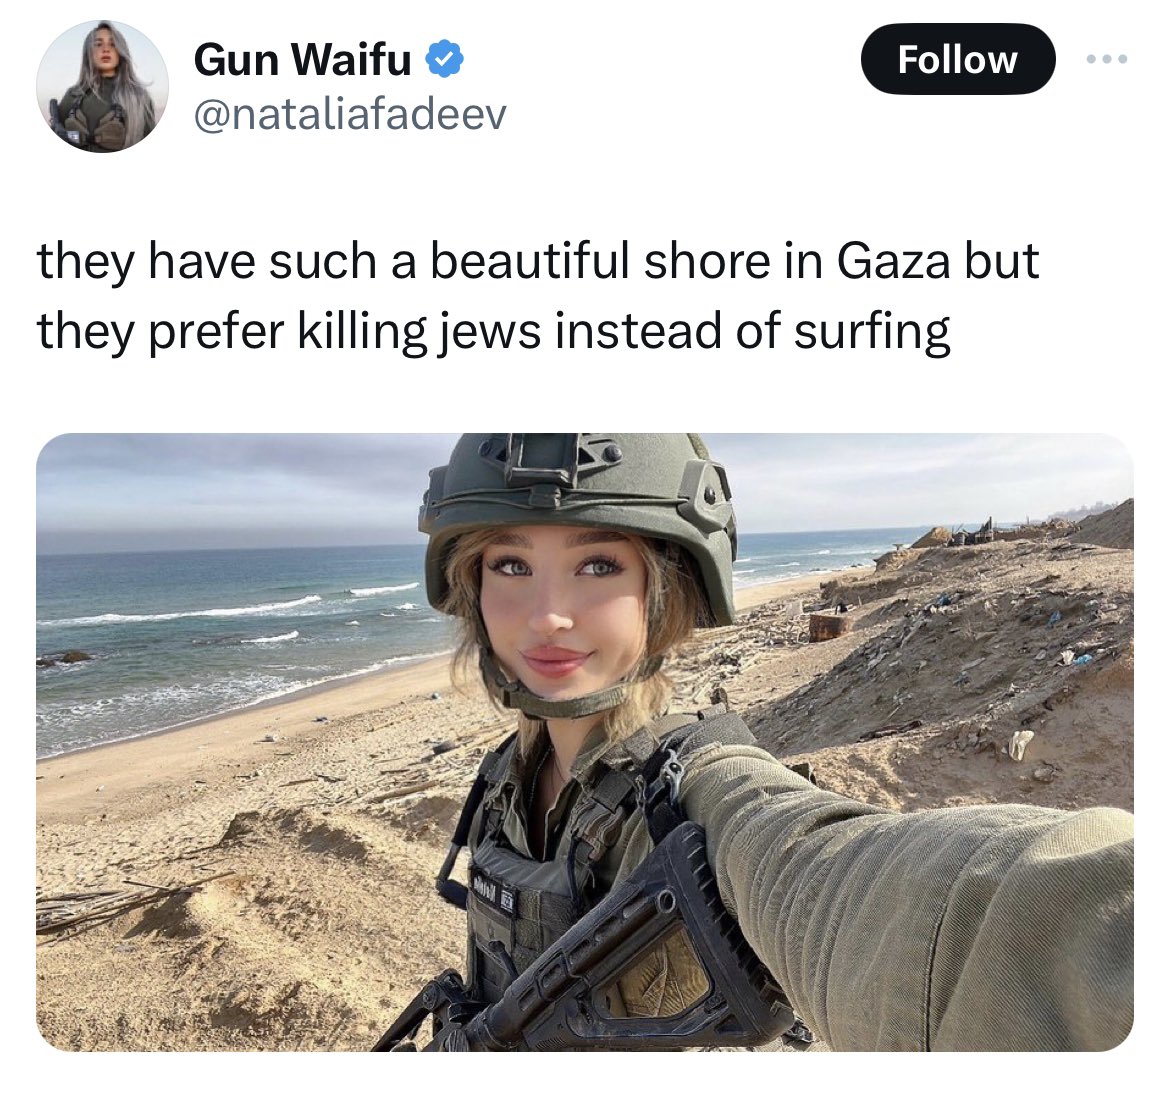 The importation of surfboards into Gaza has been prohibited by Israel. If the Palestinians want to surf on their own shores, they have to overcome a genocidal apartheid state full of brainwashed child soldiers who don't have a clue they're pawns for Western imperialism.